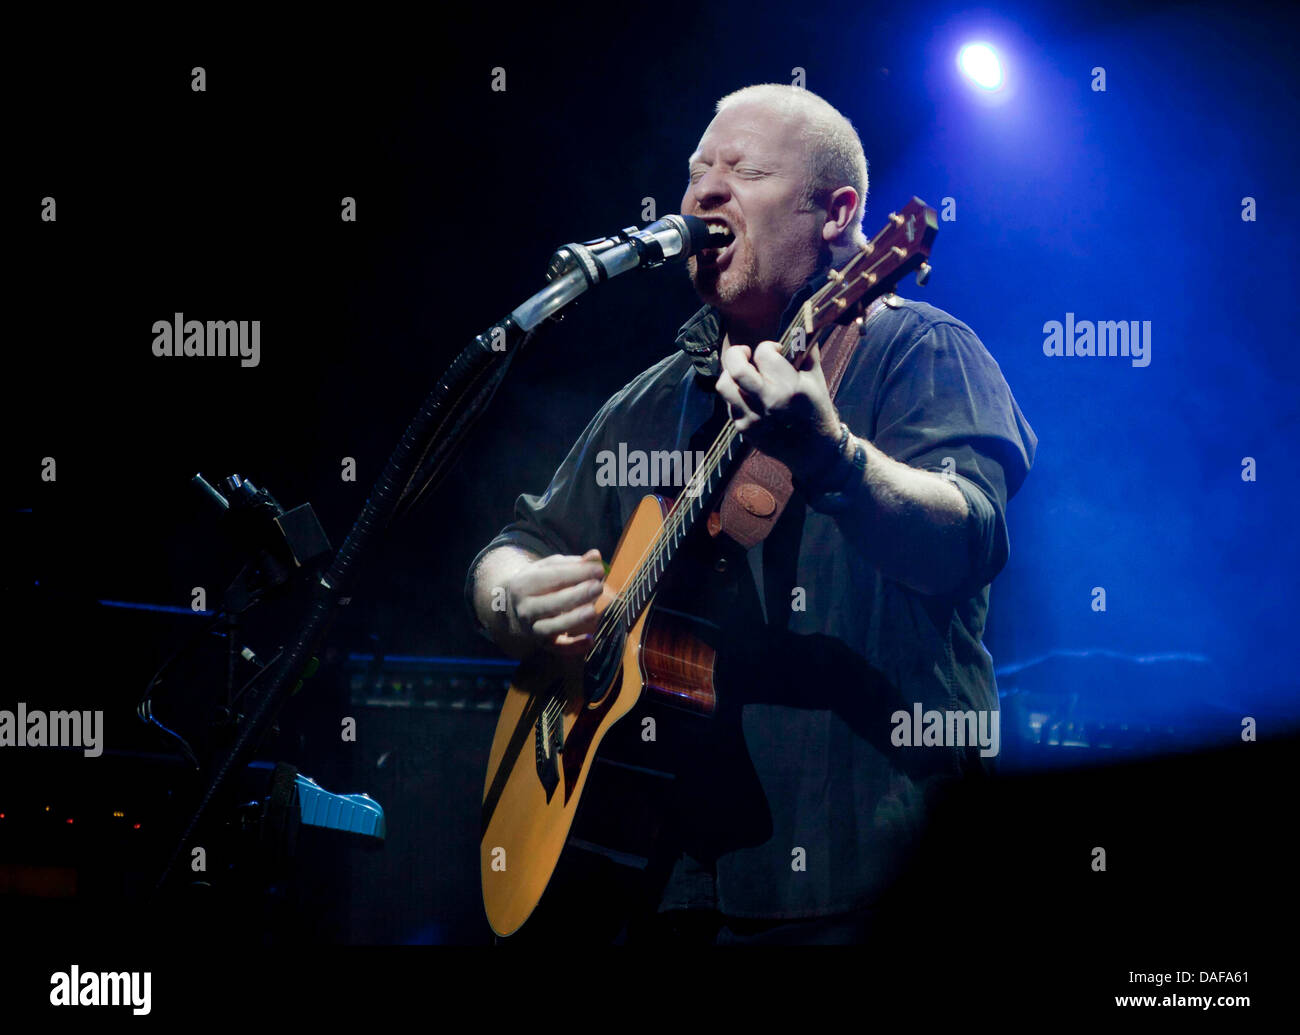 Singer and guitarist Steve Mac performing with his Band "The Australian Pink Floyd Show" in Höchst, Germany on 15 February 2011. The band played Pink Floyd covers. Photo: Rumpenhorst Stock Photo - Alamy